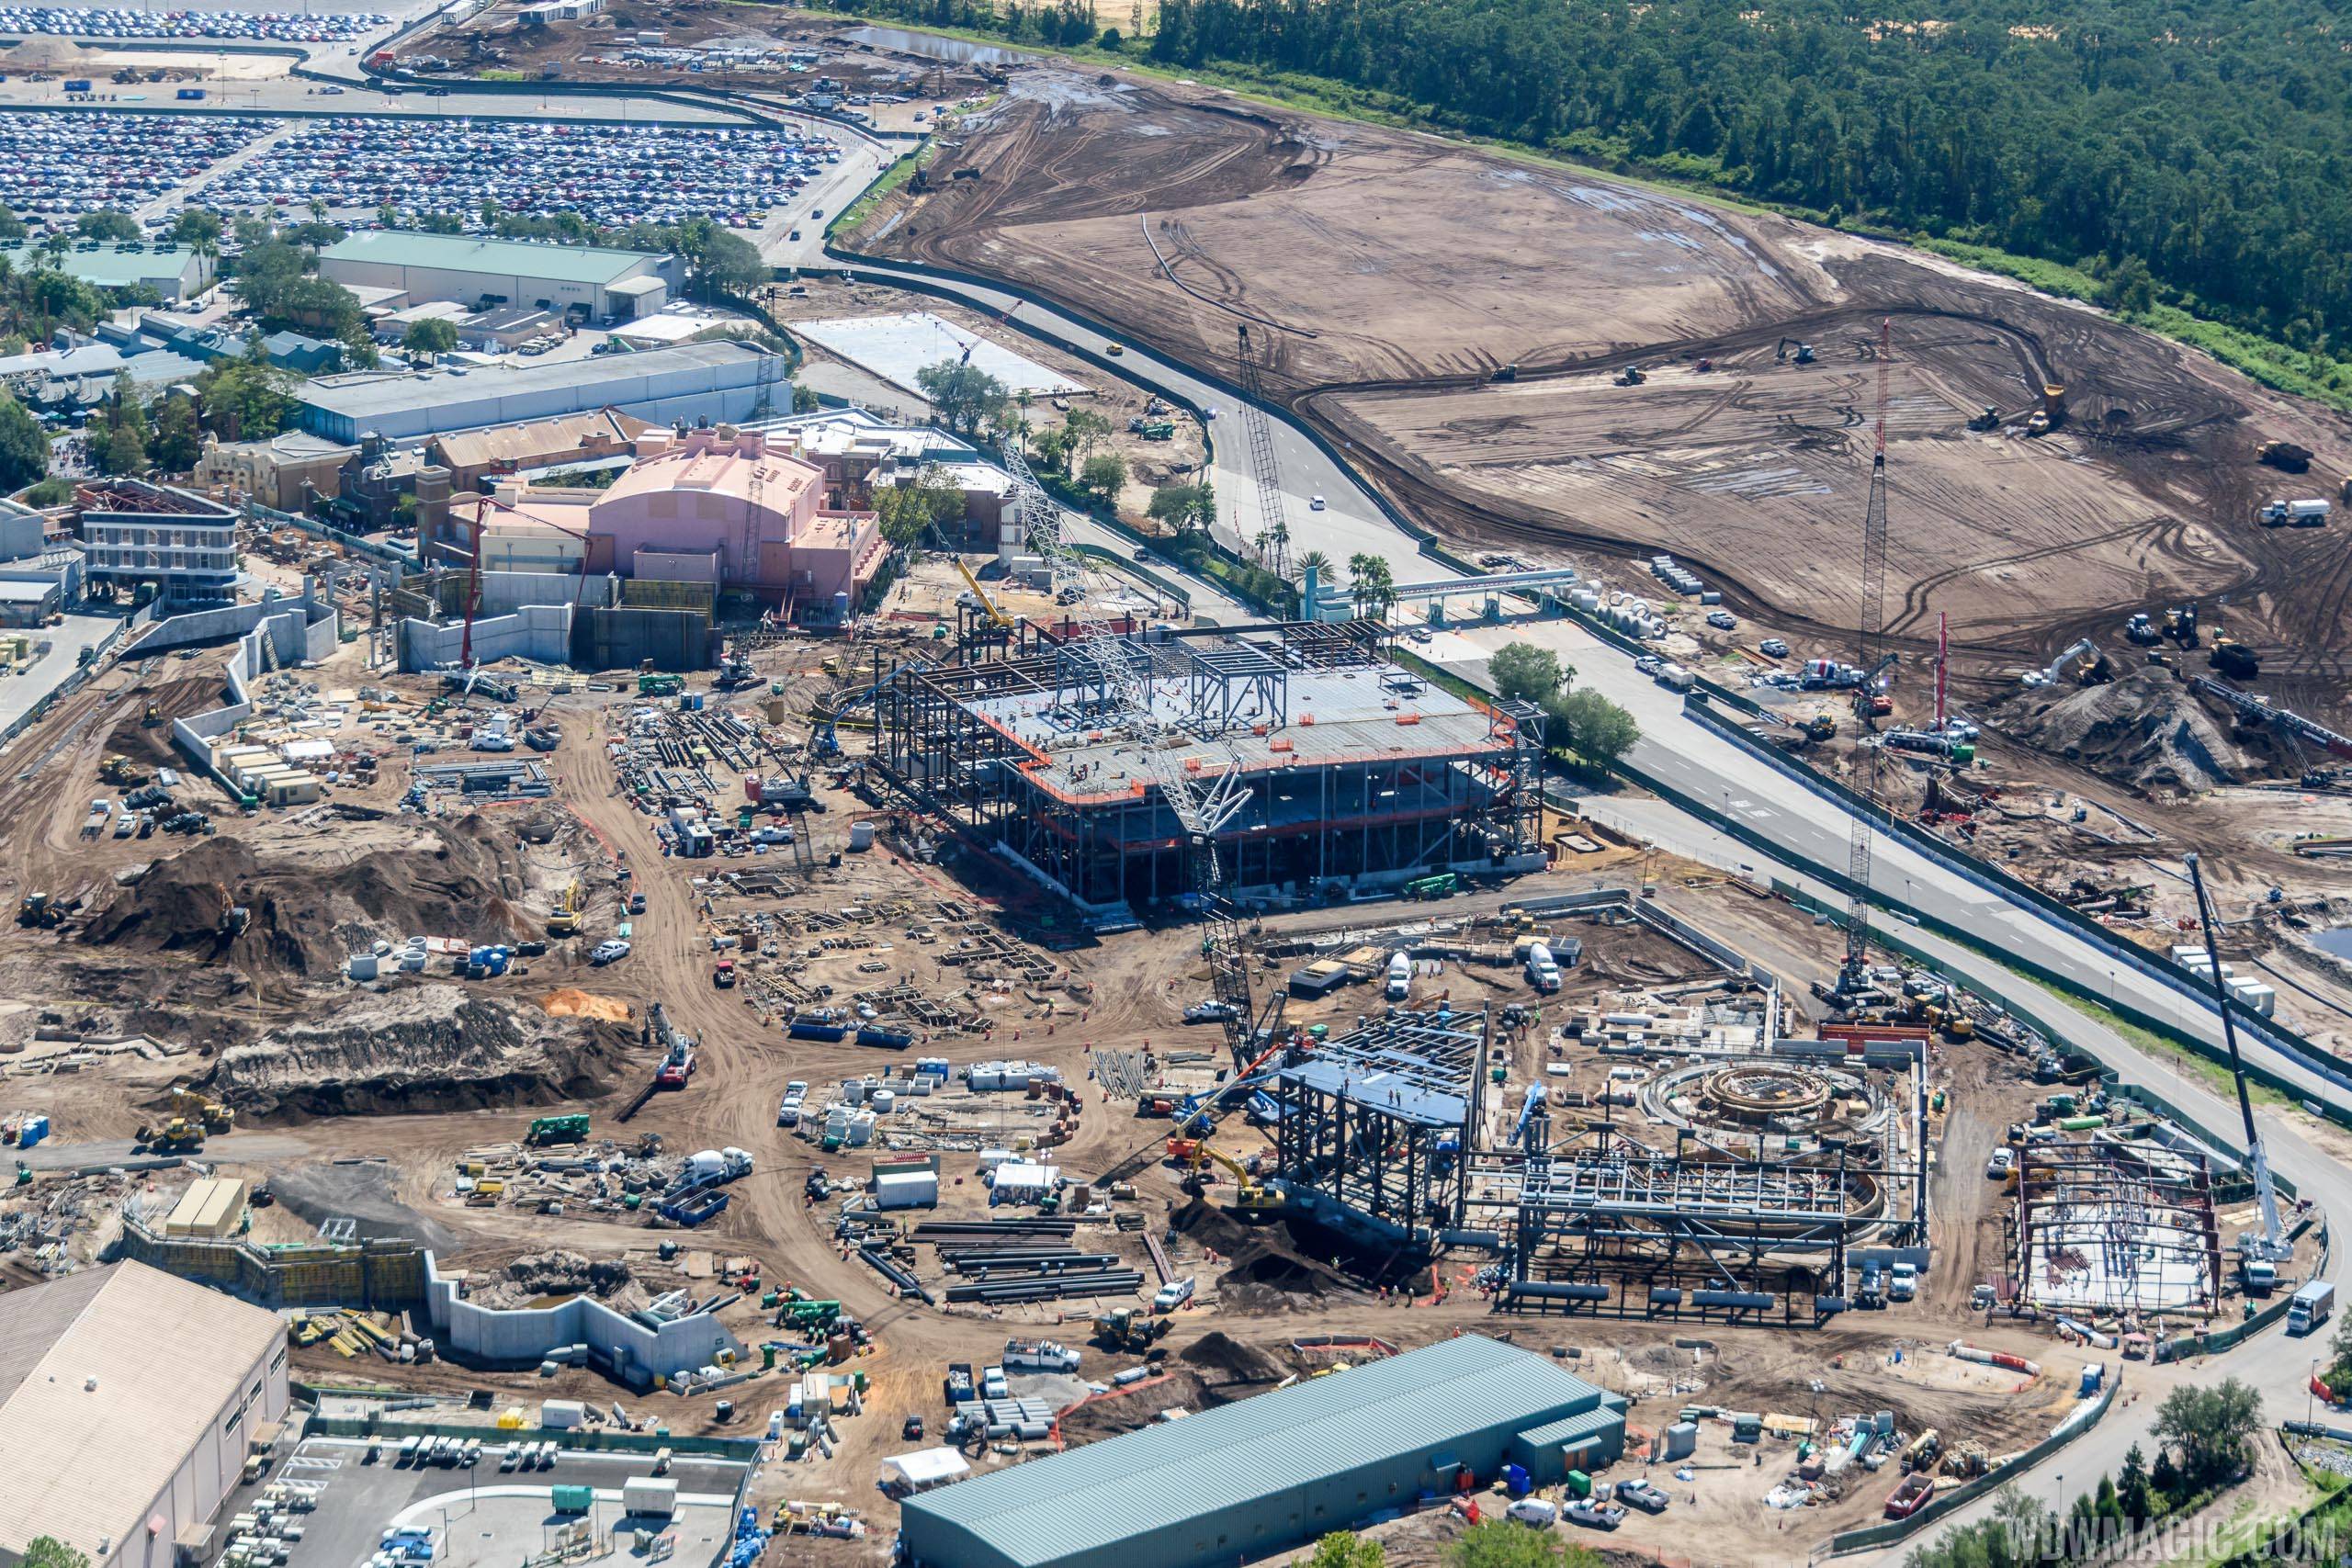 PHOTOS - Star Wars Galaxy's Edge construction pictures